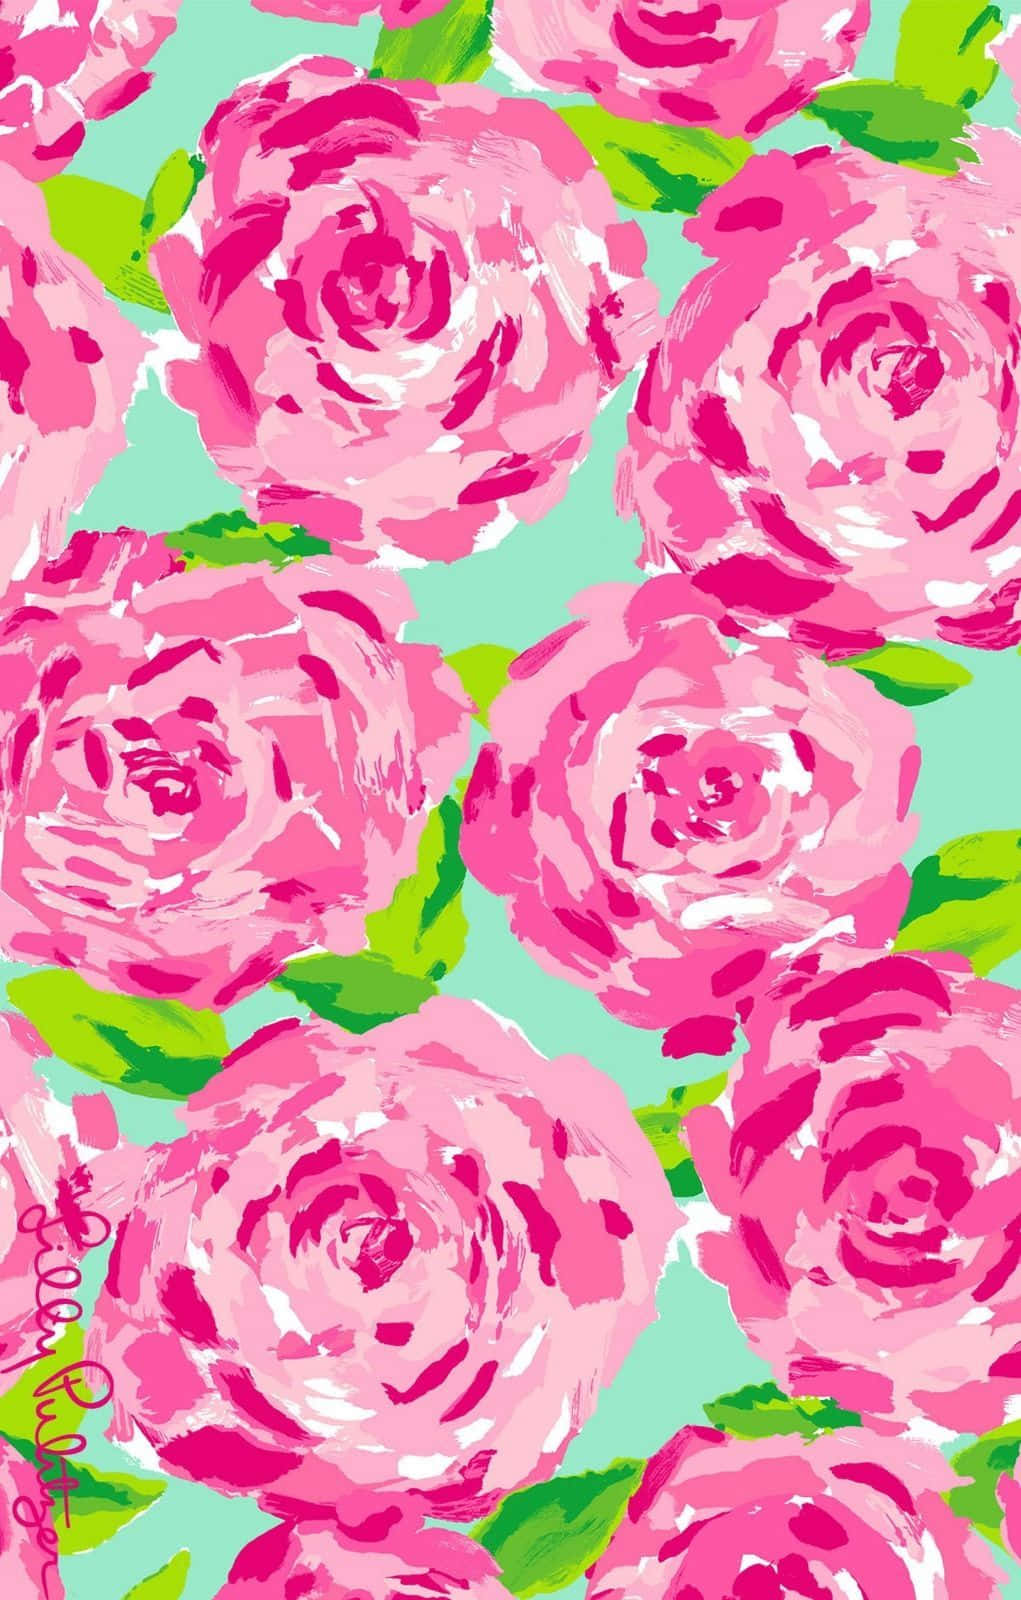 Elegant Lilly Pulitzer pattern in vibrant colors